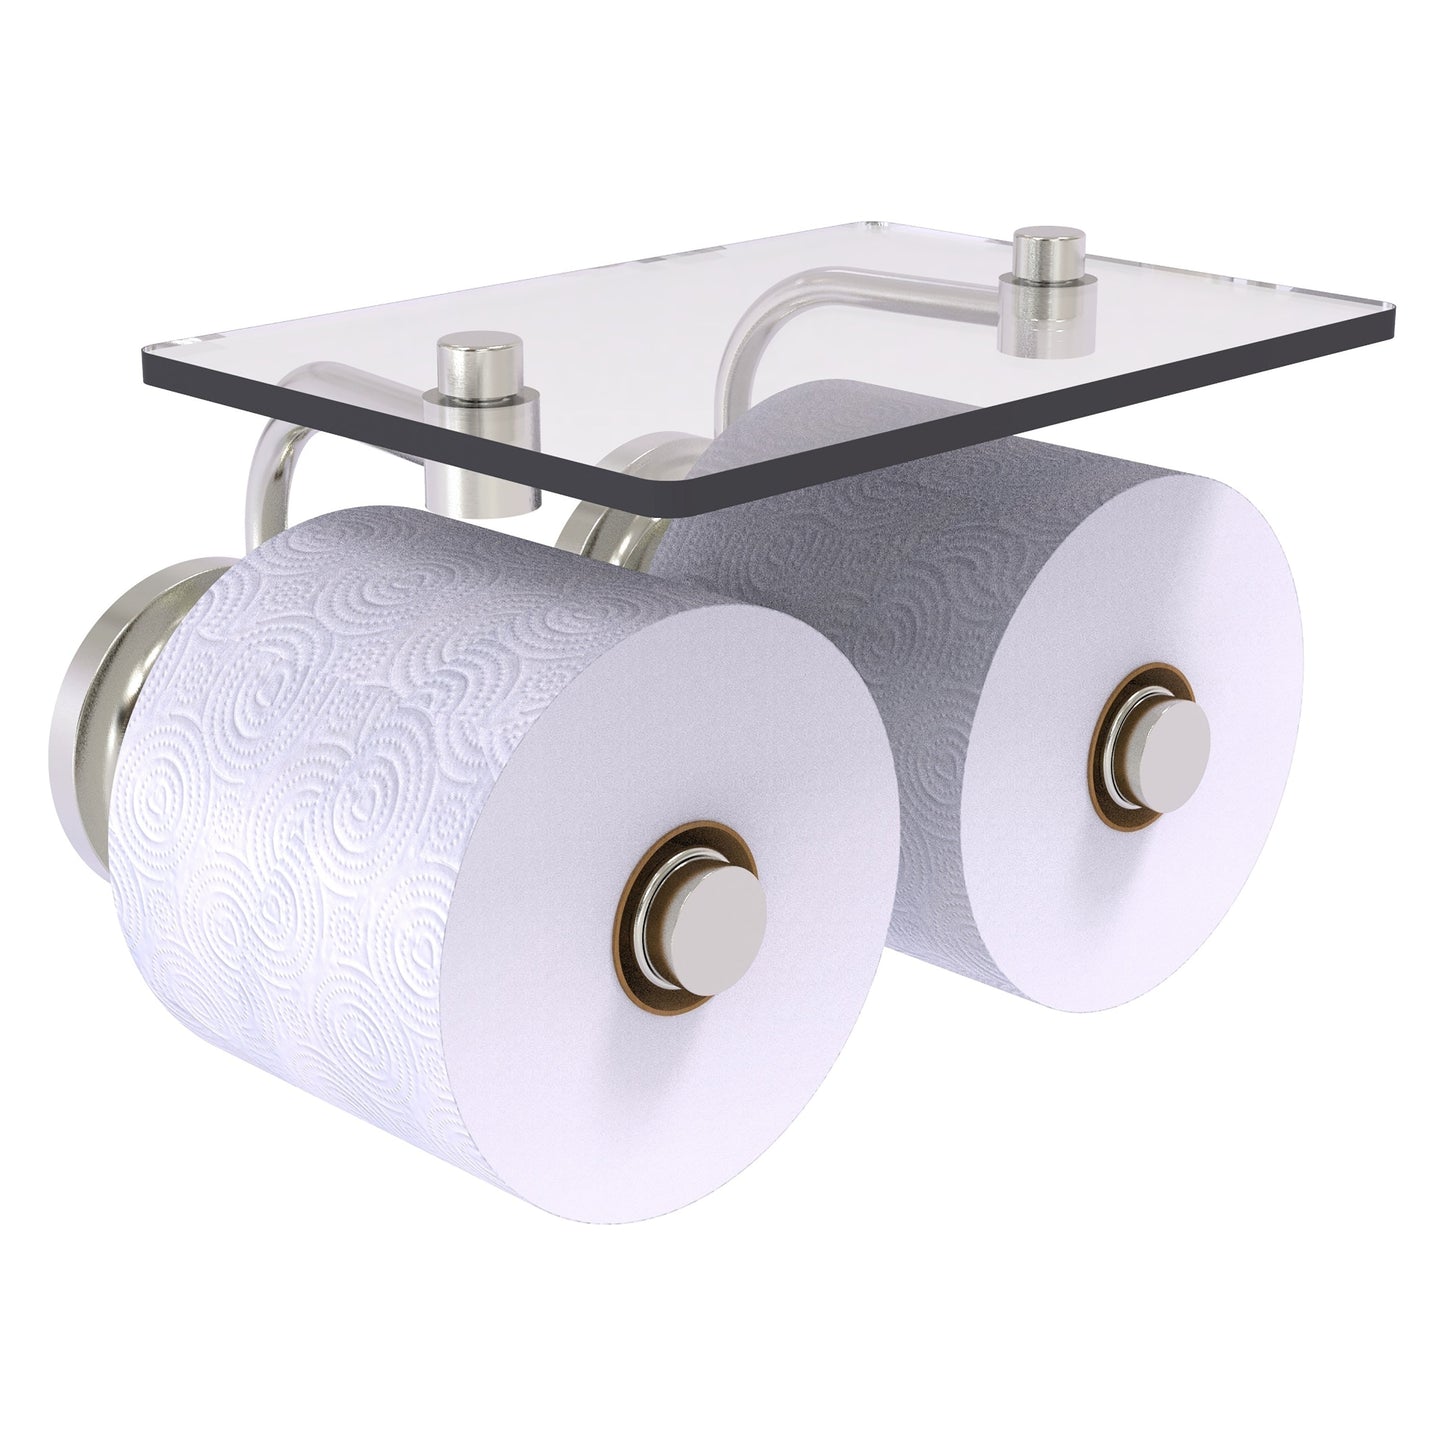 Allied Brass Que New 8.5" x 7.4" Satin Nickel Solid Brass 2-Roll Toilet Paper Holder With Glass Shelf